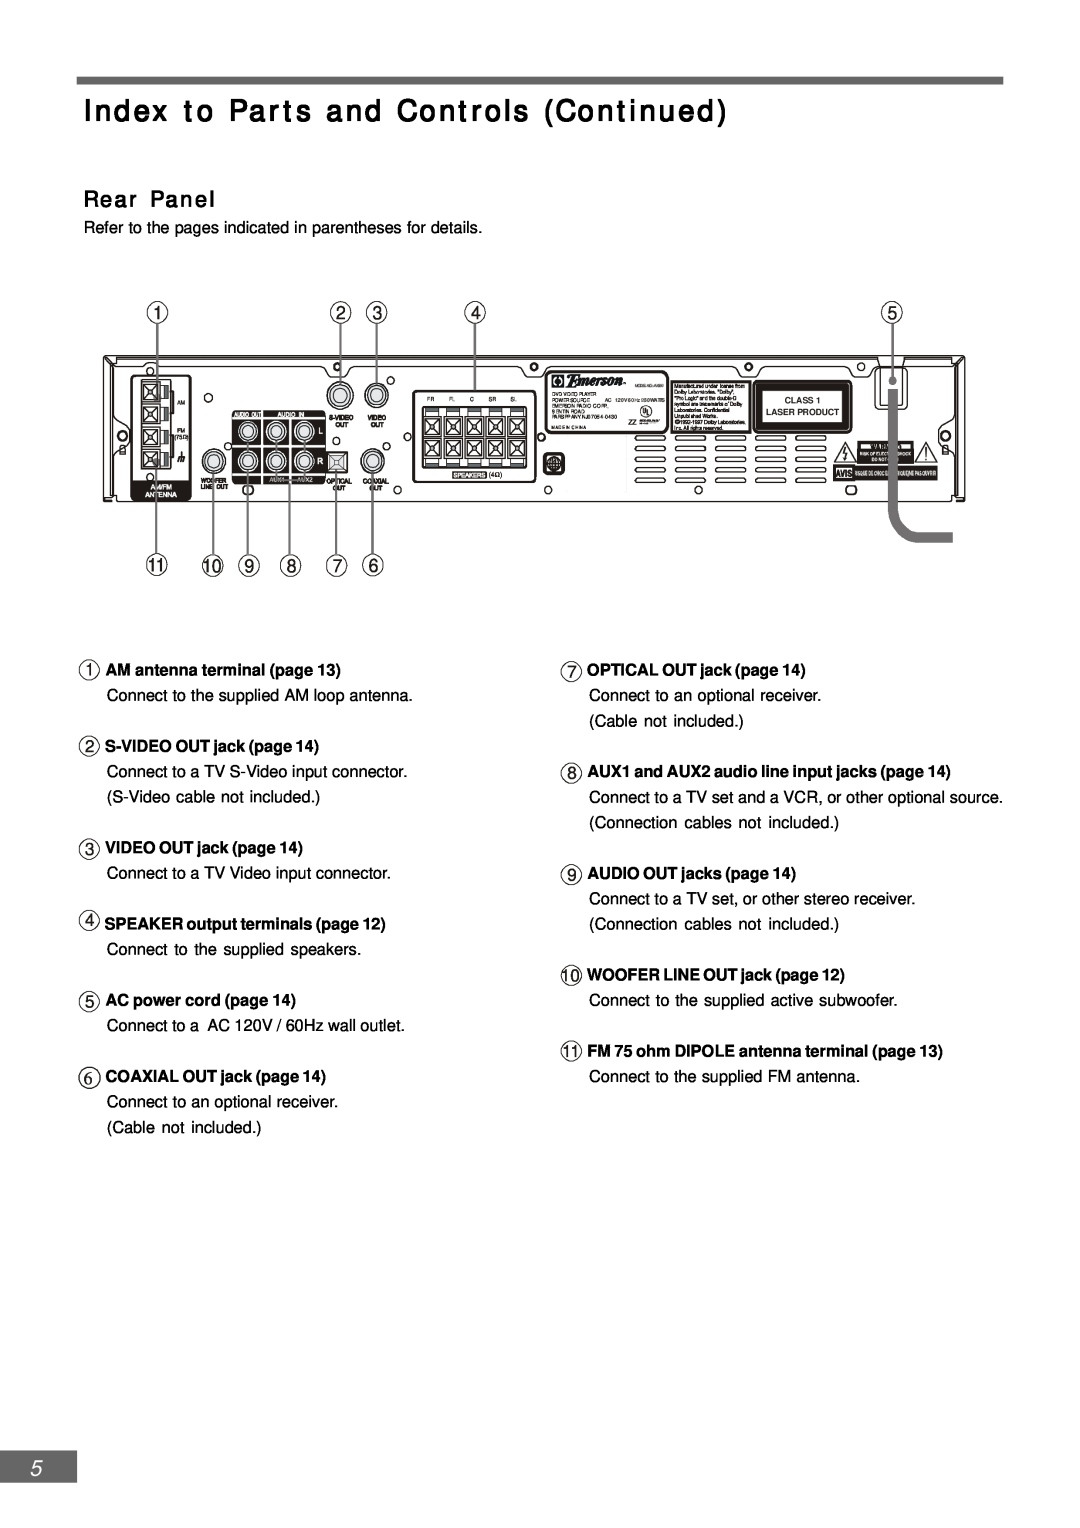 Emerson AV301 owner manual Index to Parts and Controls Continued, Rear Panel 